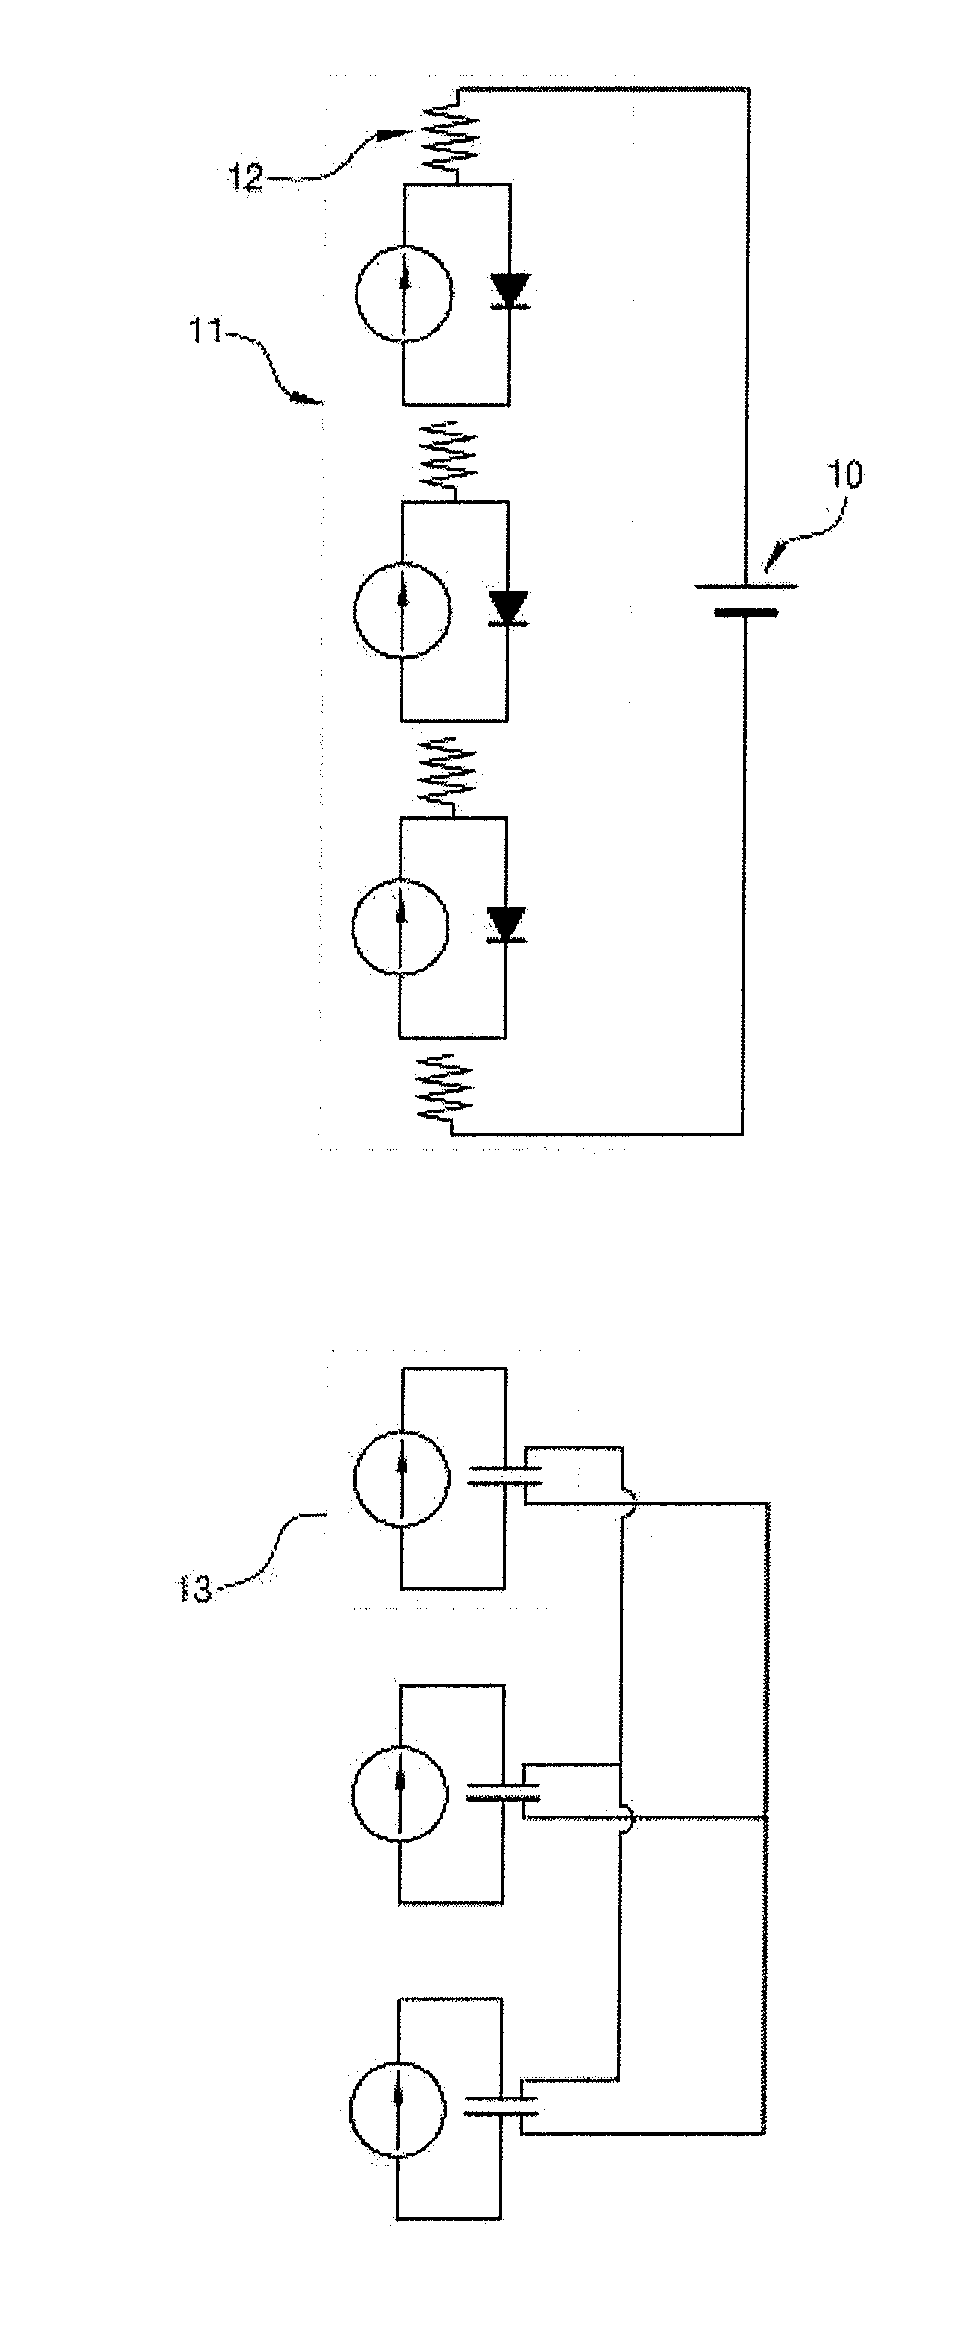 Photovoltaic-Charged Secondary Battery System